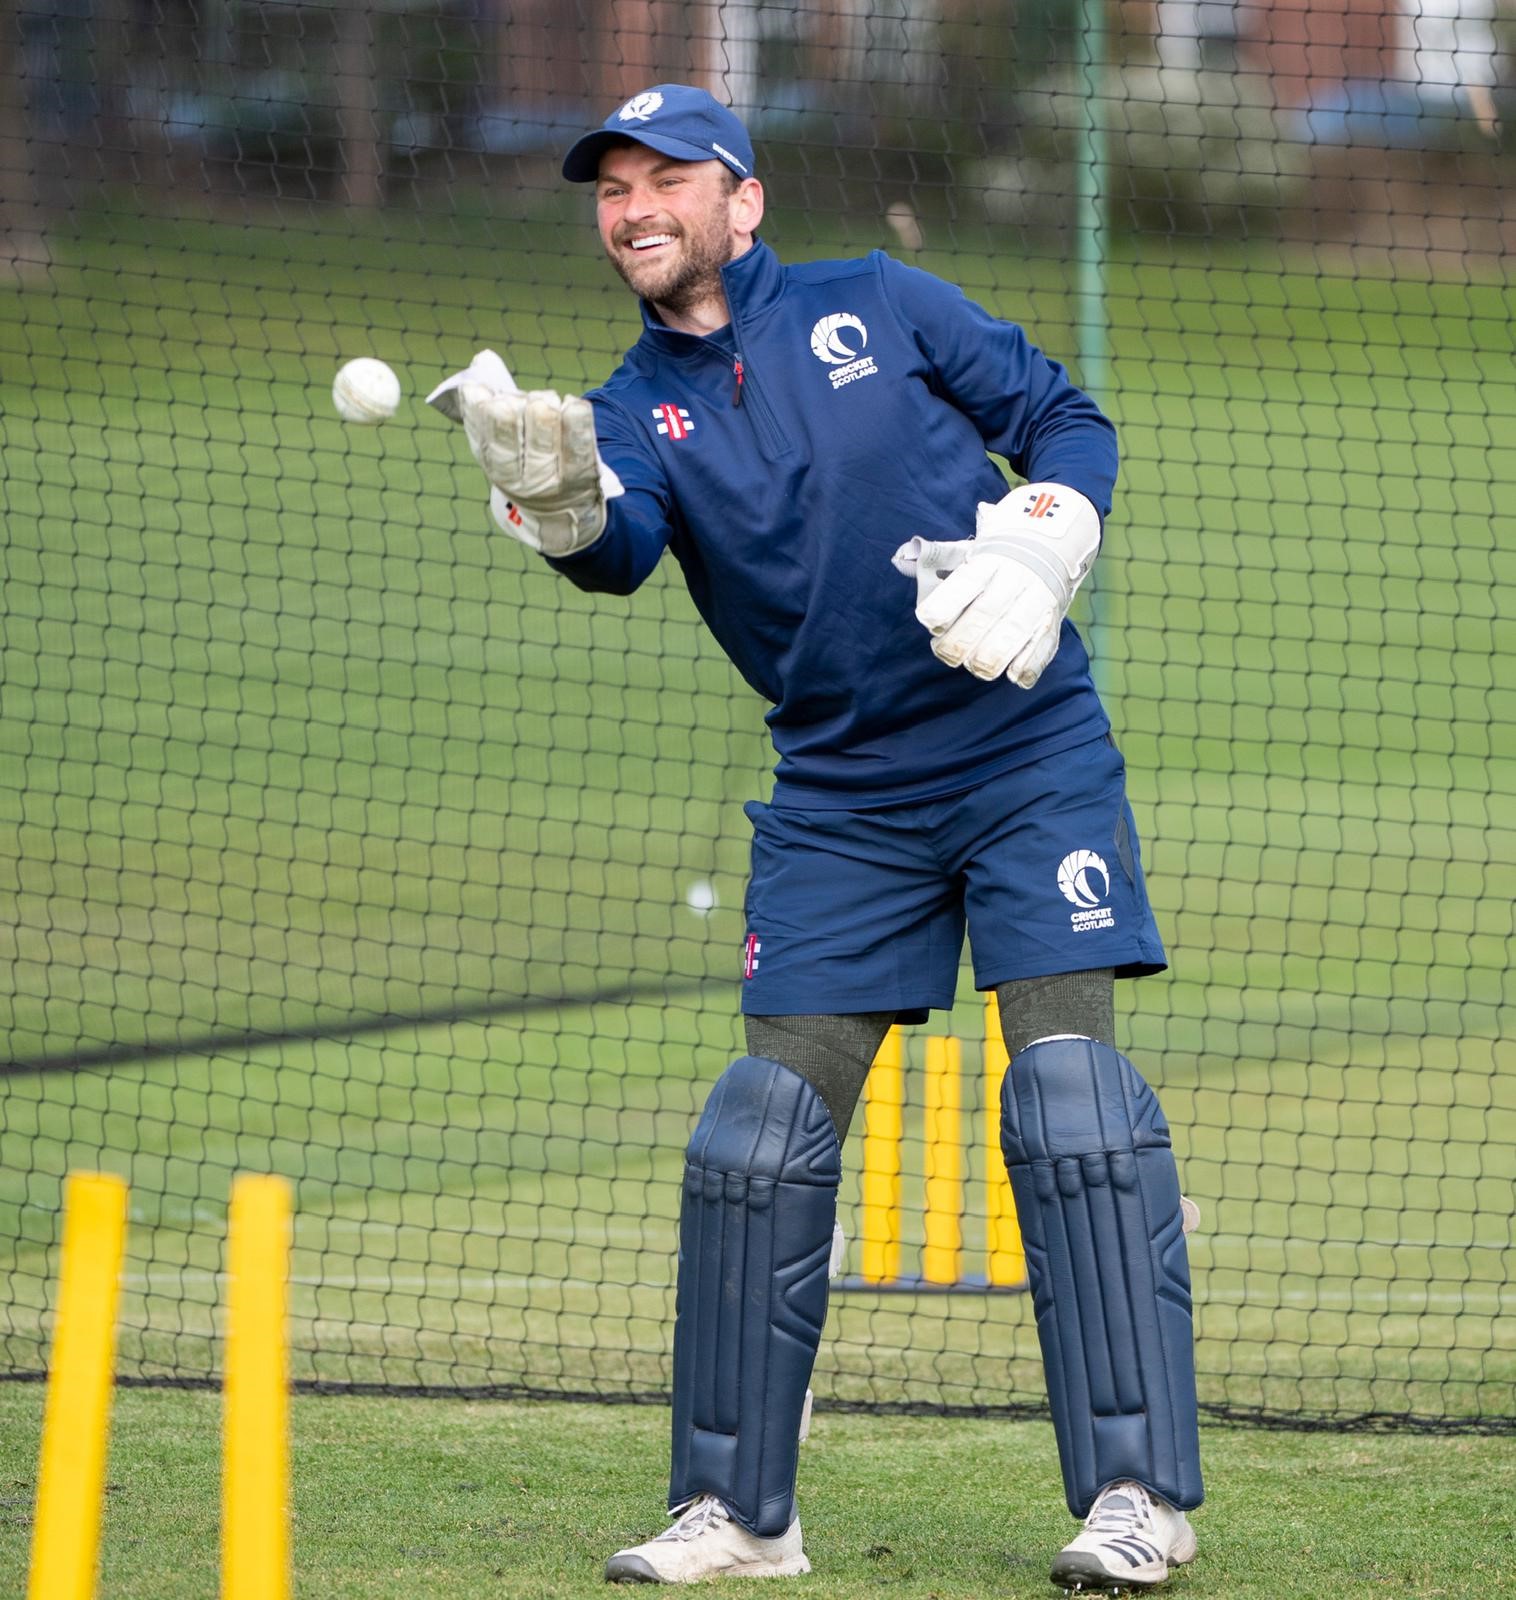 Cricket Scotland: Epic bike rides, a hole in one and getting back on the cricket pitch